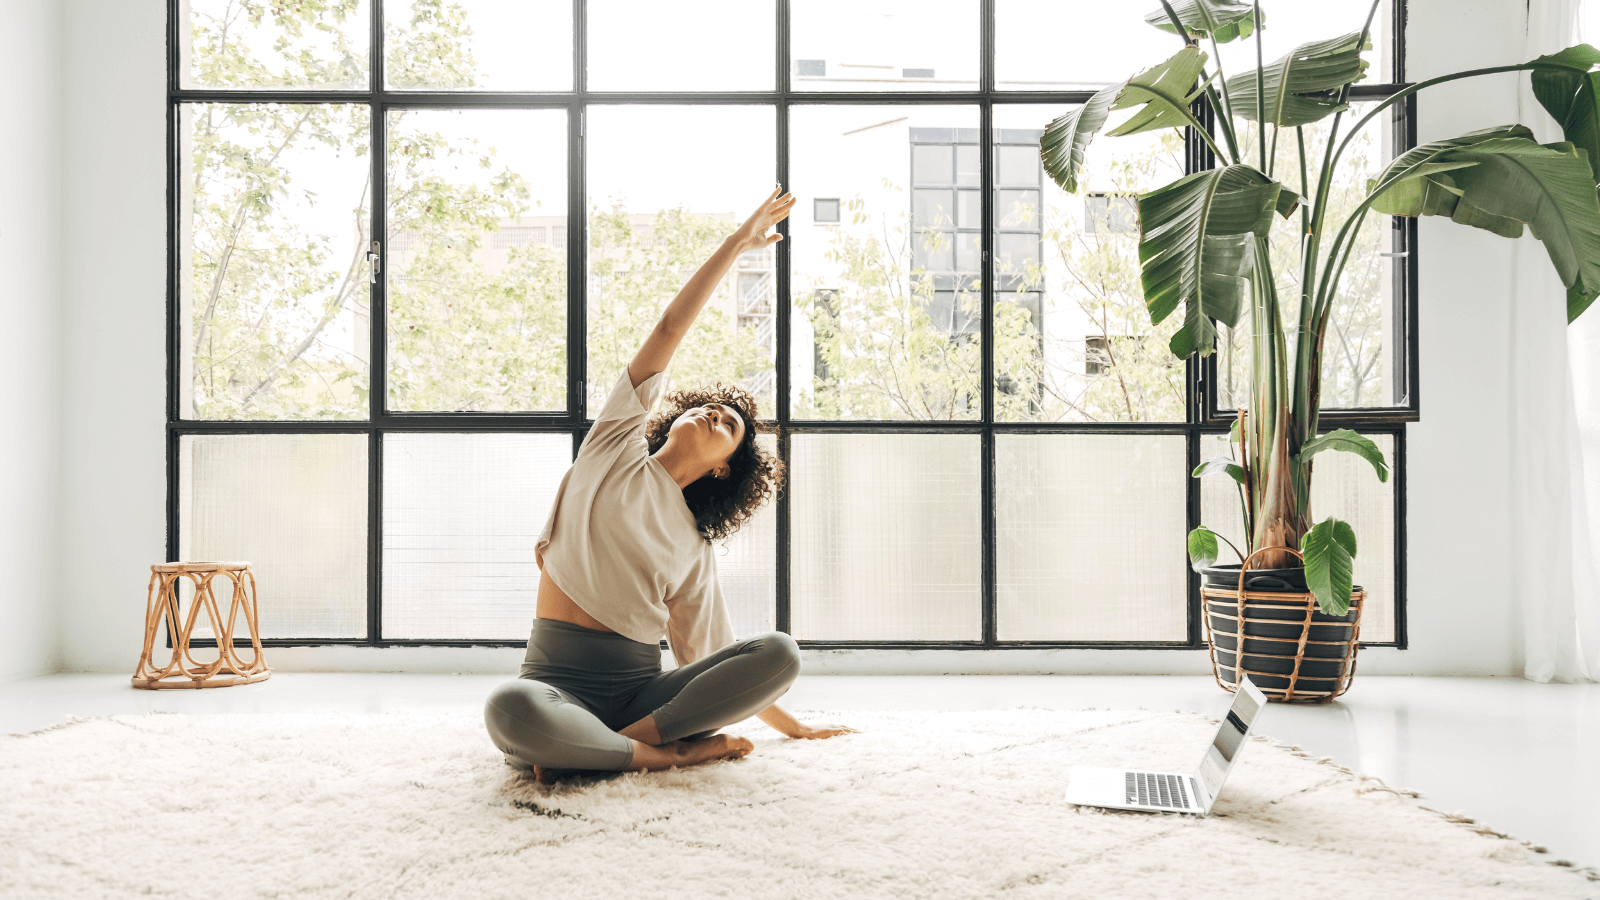 Every Body Yoga' Encourages Self-Love And Everyone To Get On The Mat